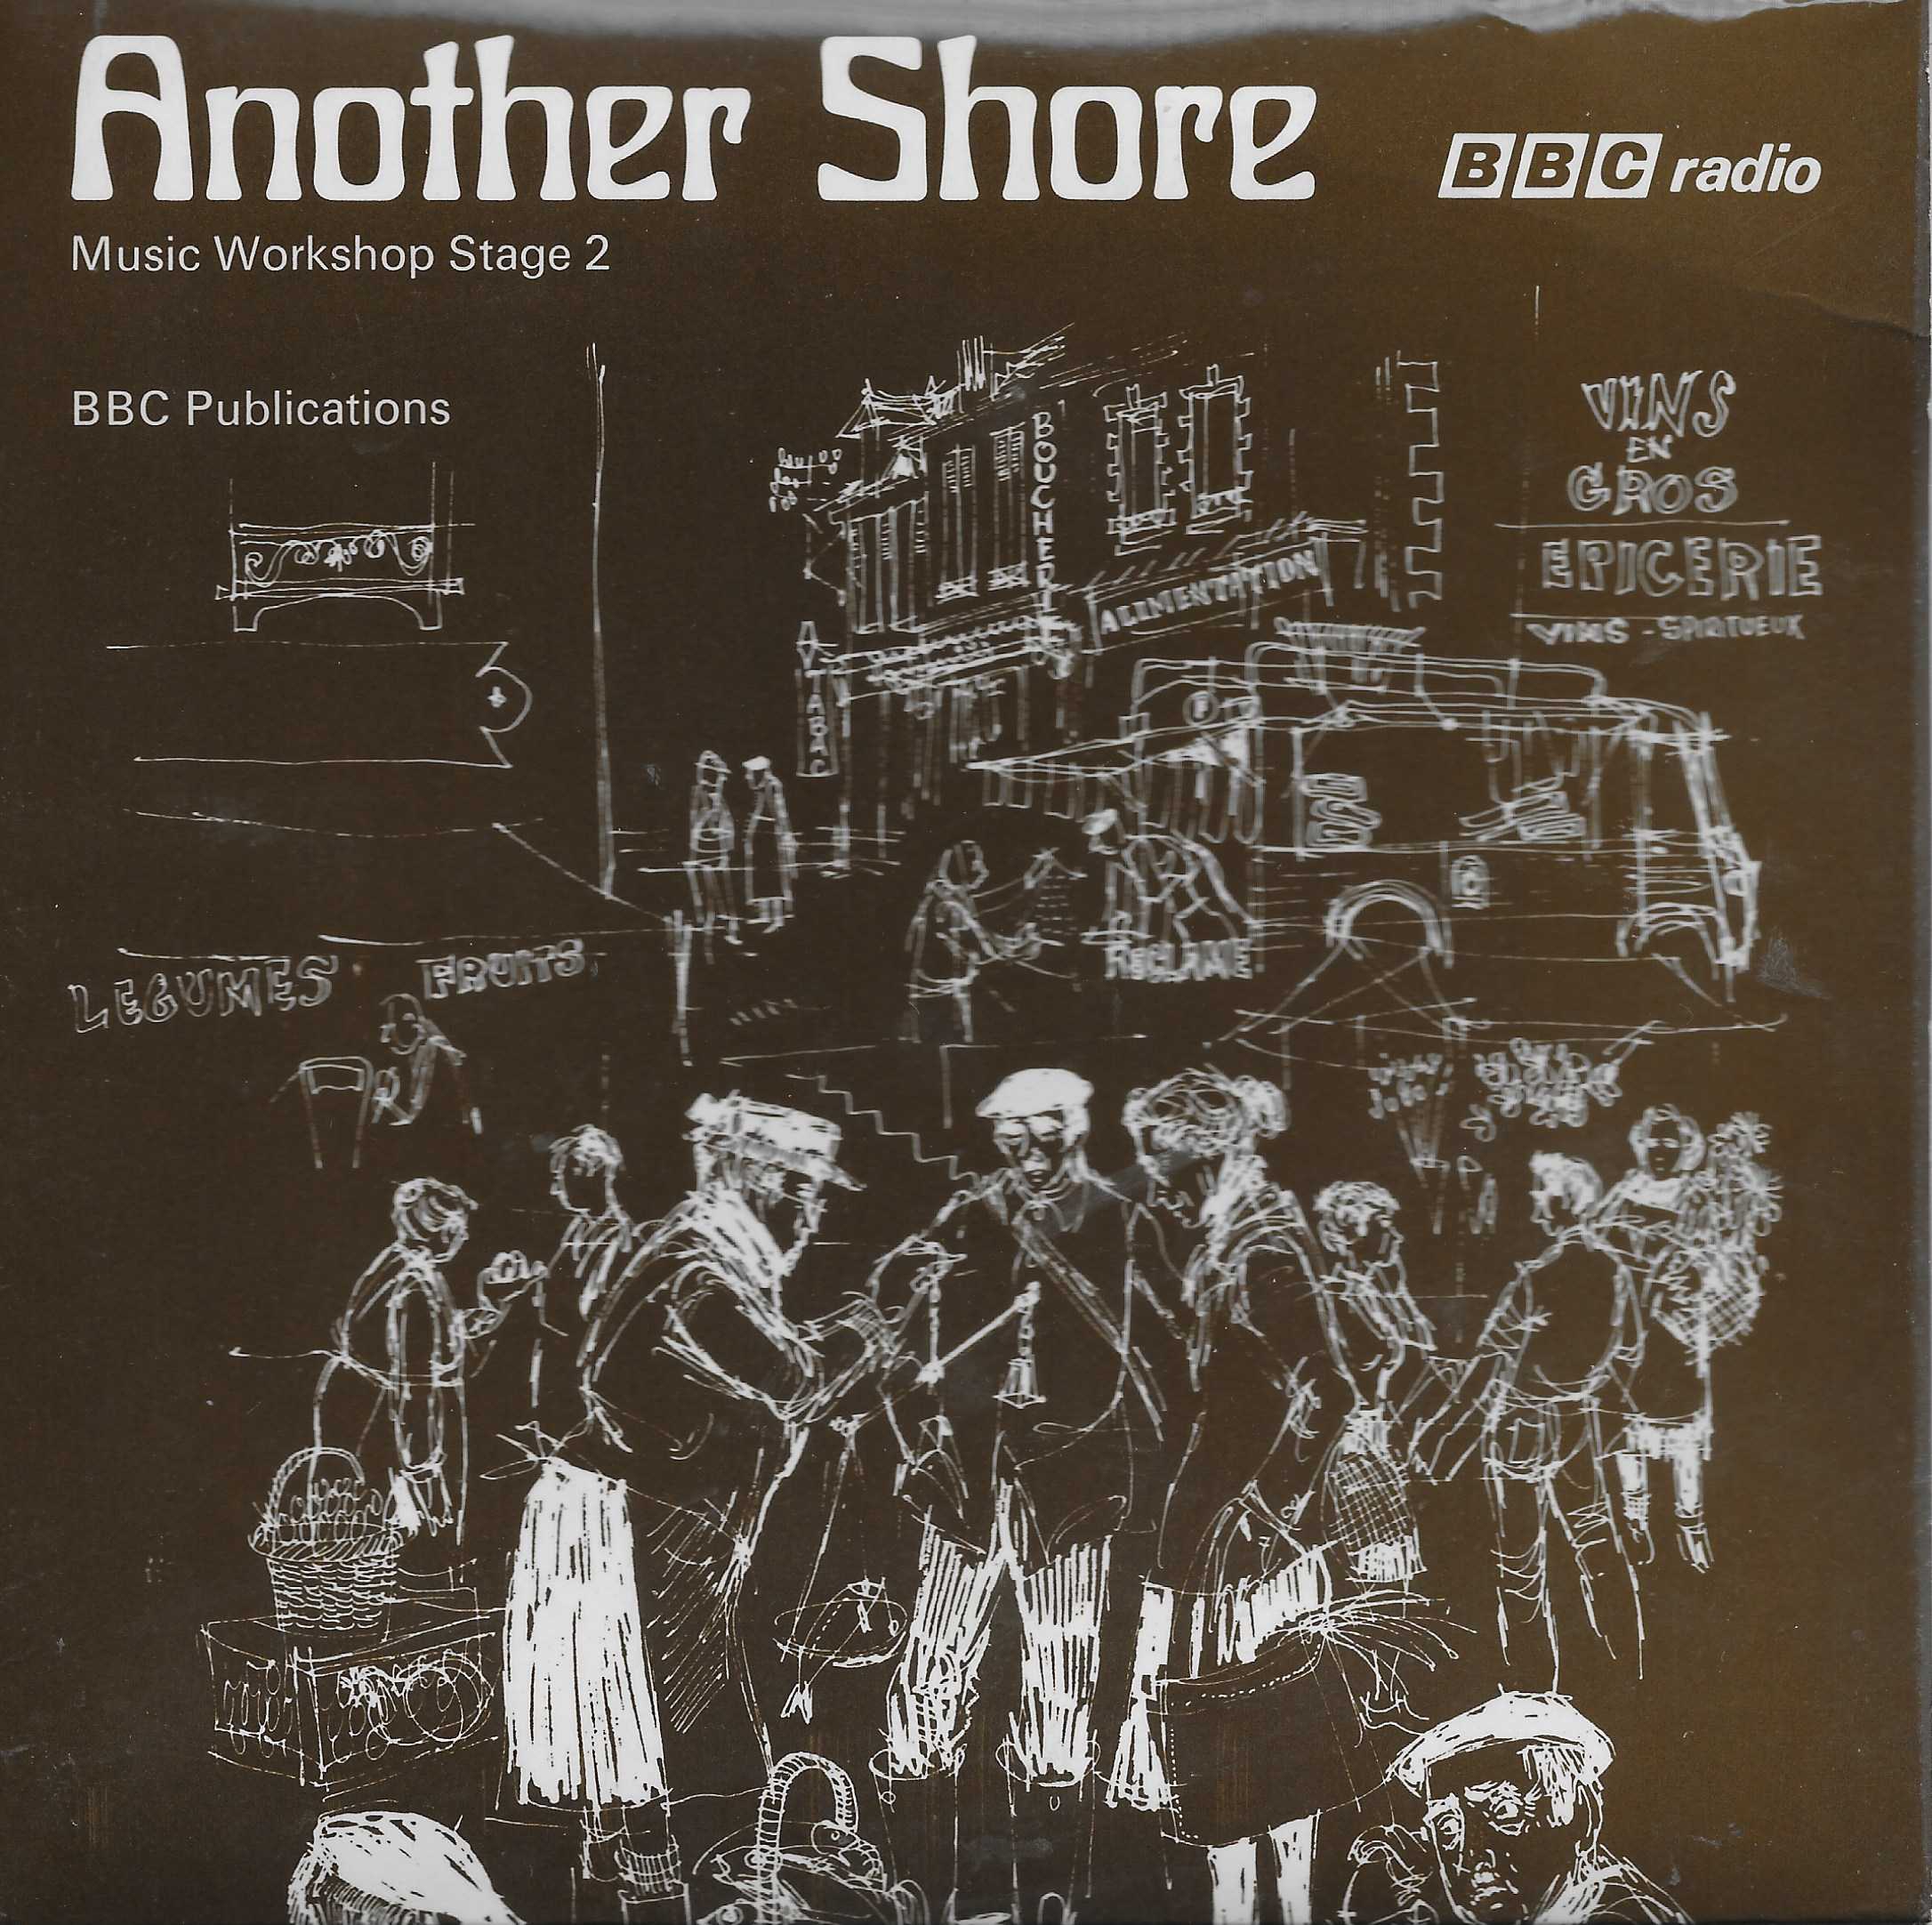 Picture of OP 157 Another shore by artist Jan Rosol from the BBC records and Tapes library